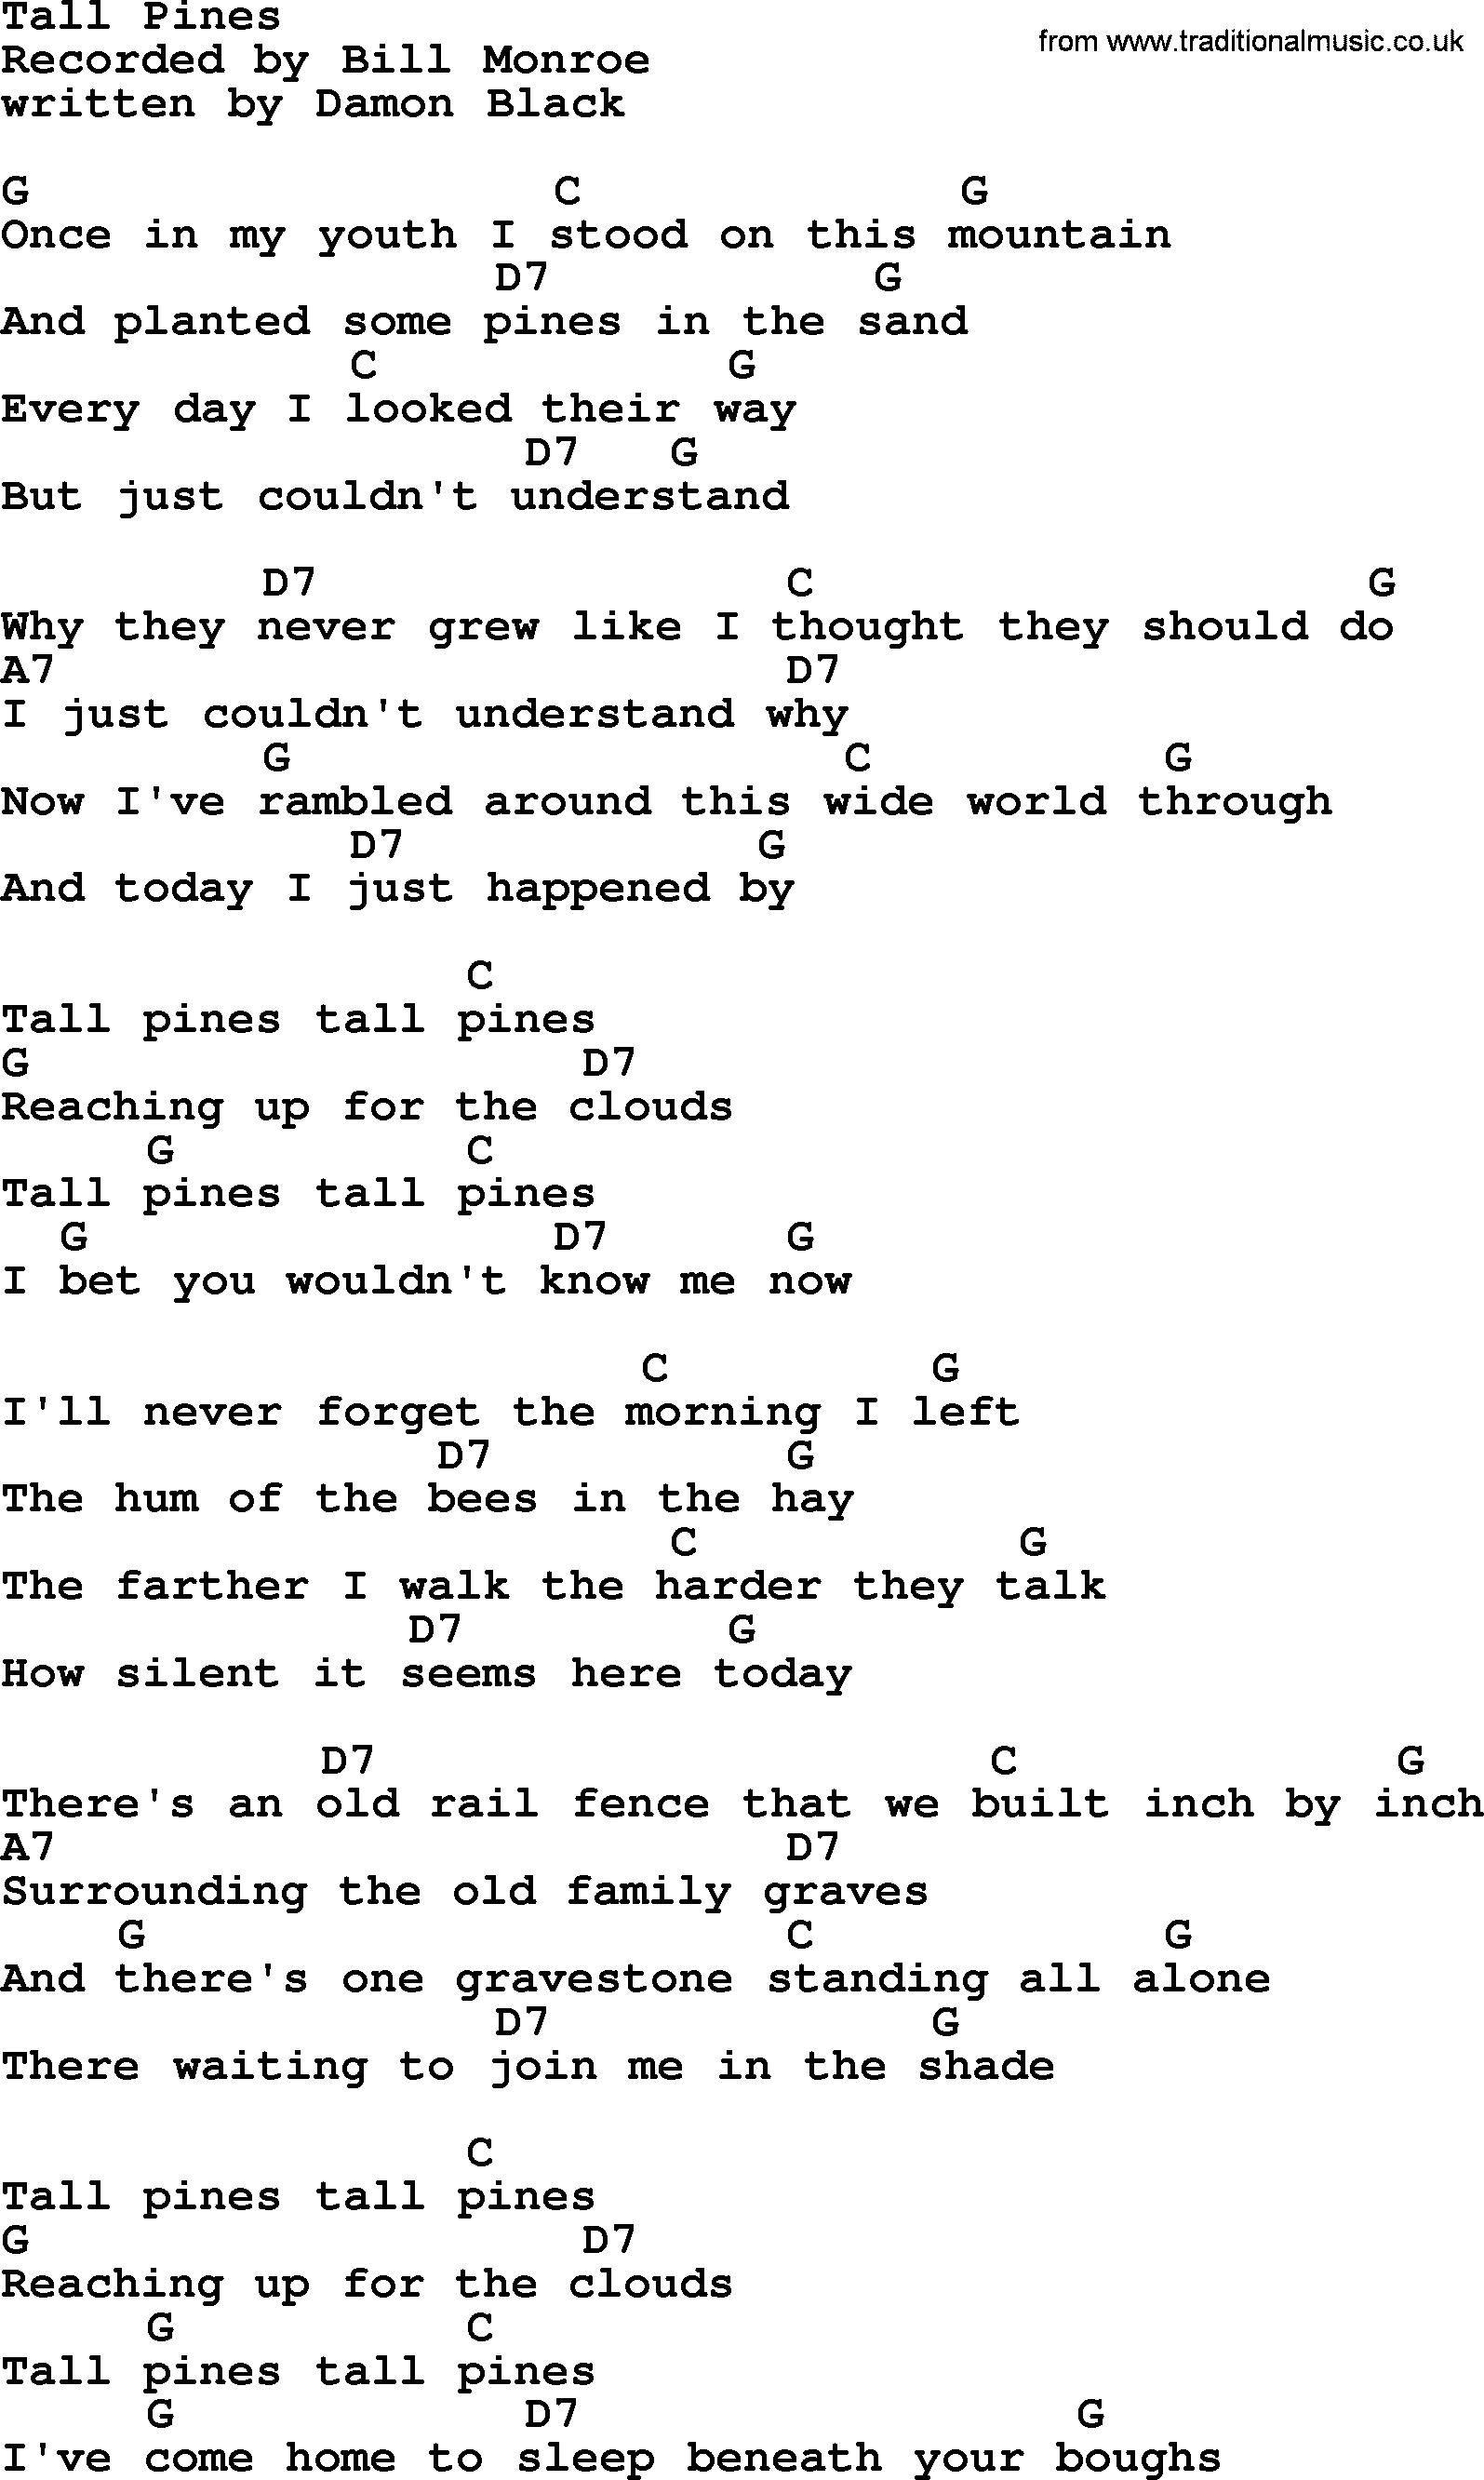 Bluegrass song: Tall Pines, lyrics and chords